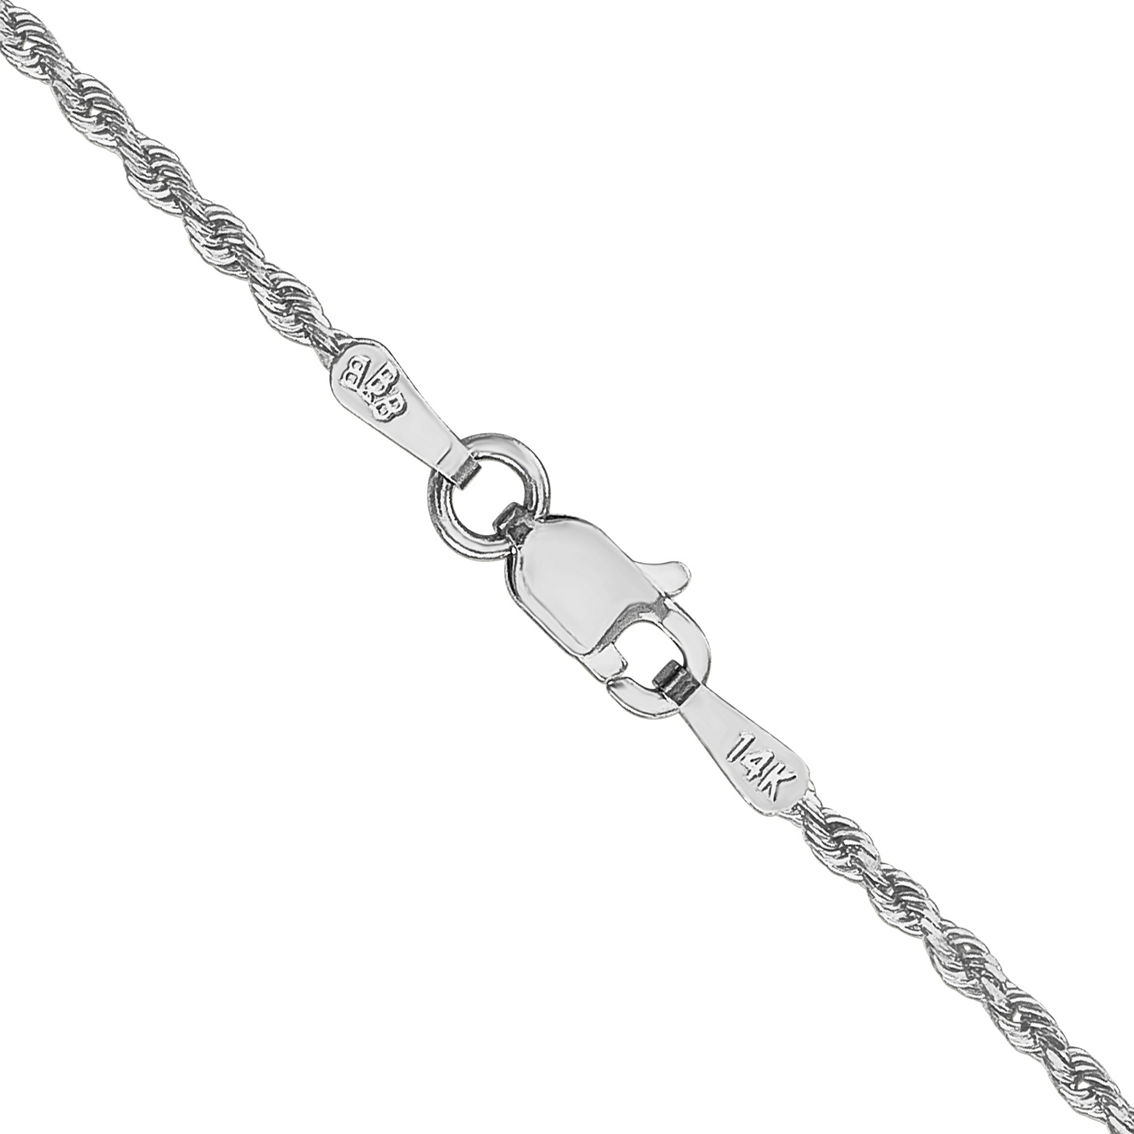 14K Gold 1.5mm Diamond Cut 20 in. Rope Chain - Image 3 of 5